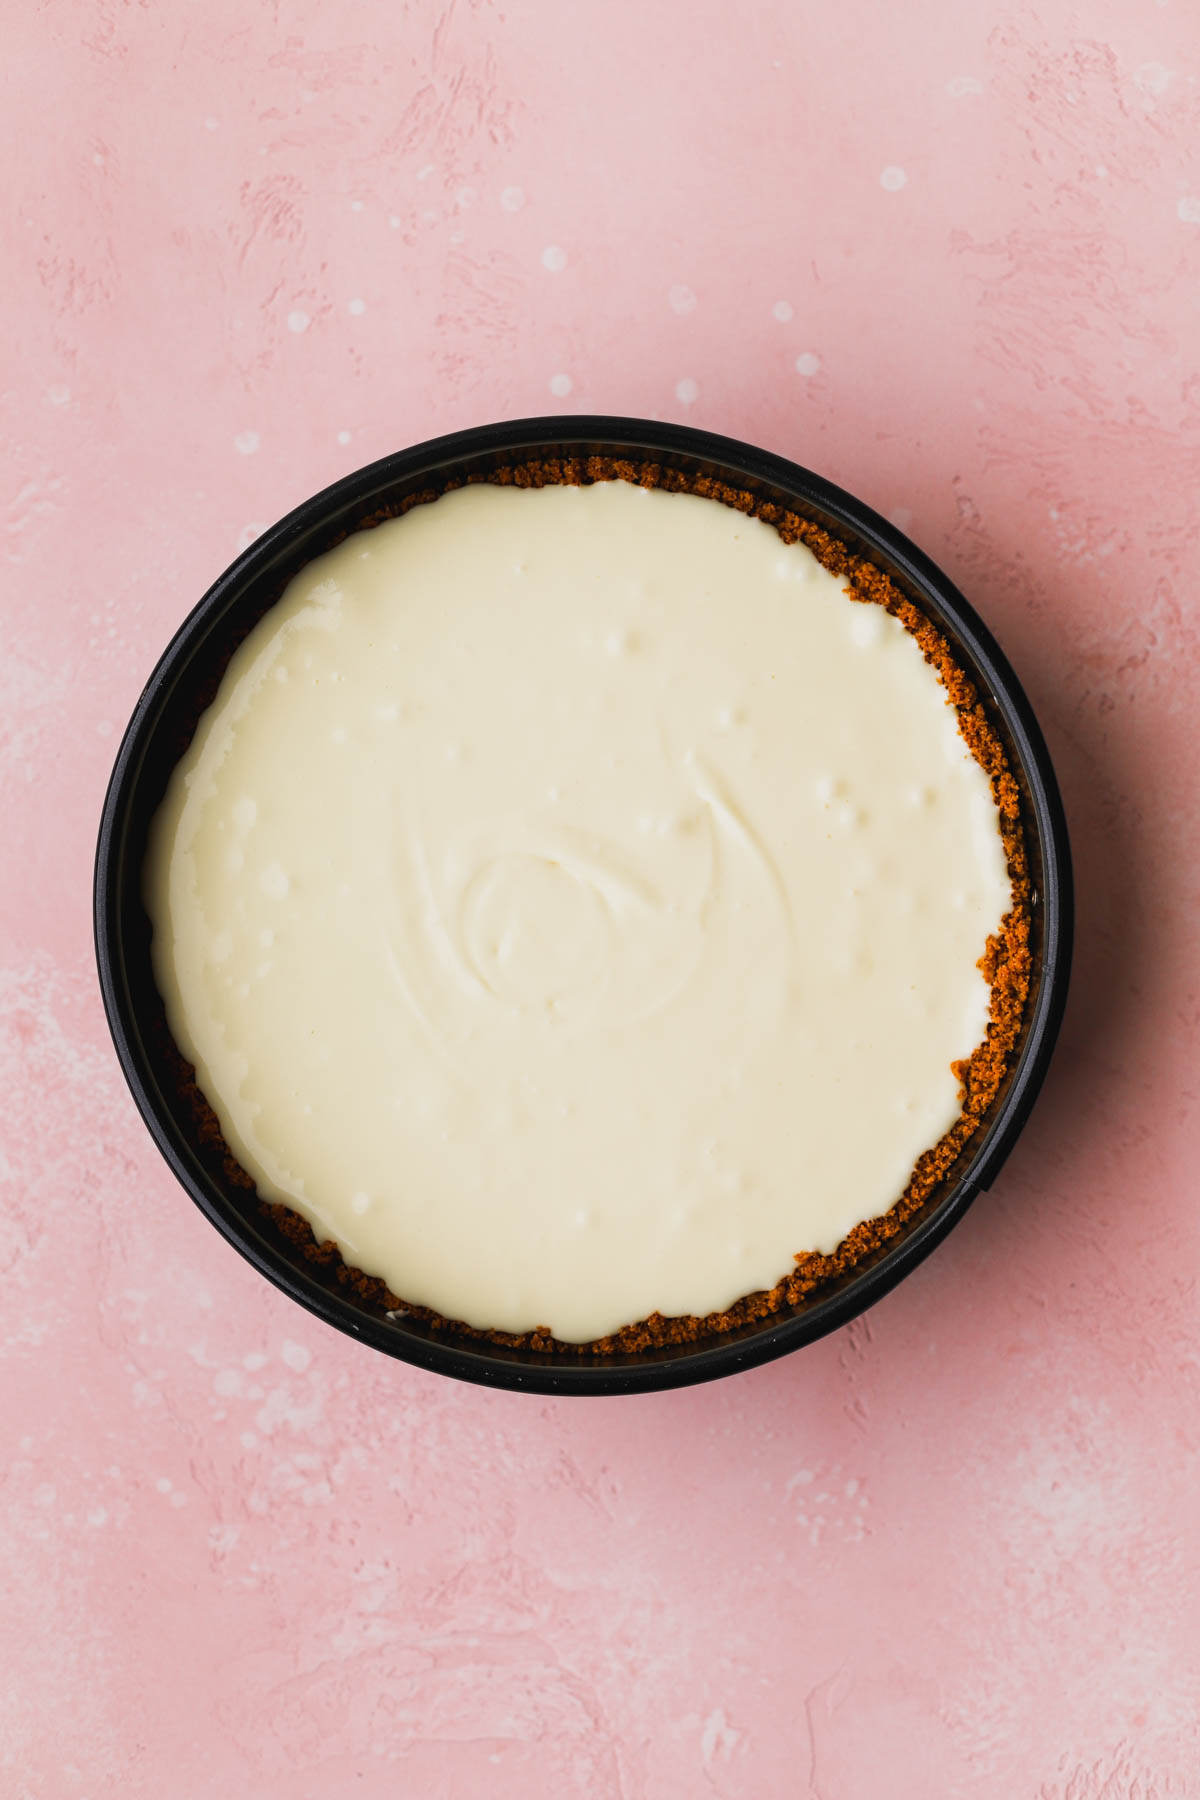 White chocolate cheesecake fillings inside a baked graham cracker crust.  